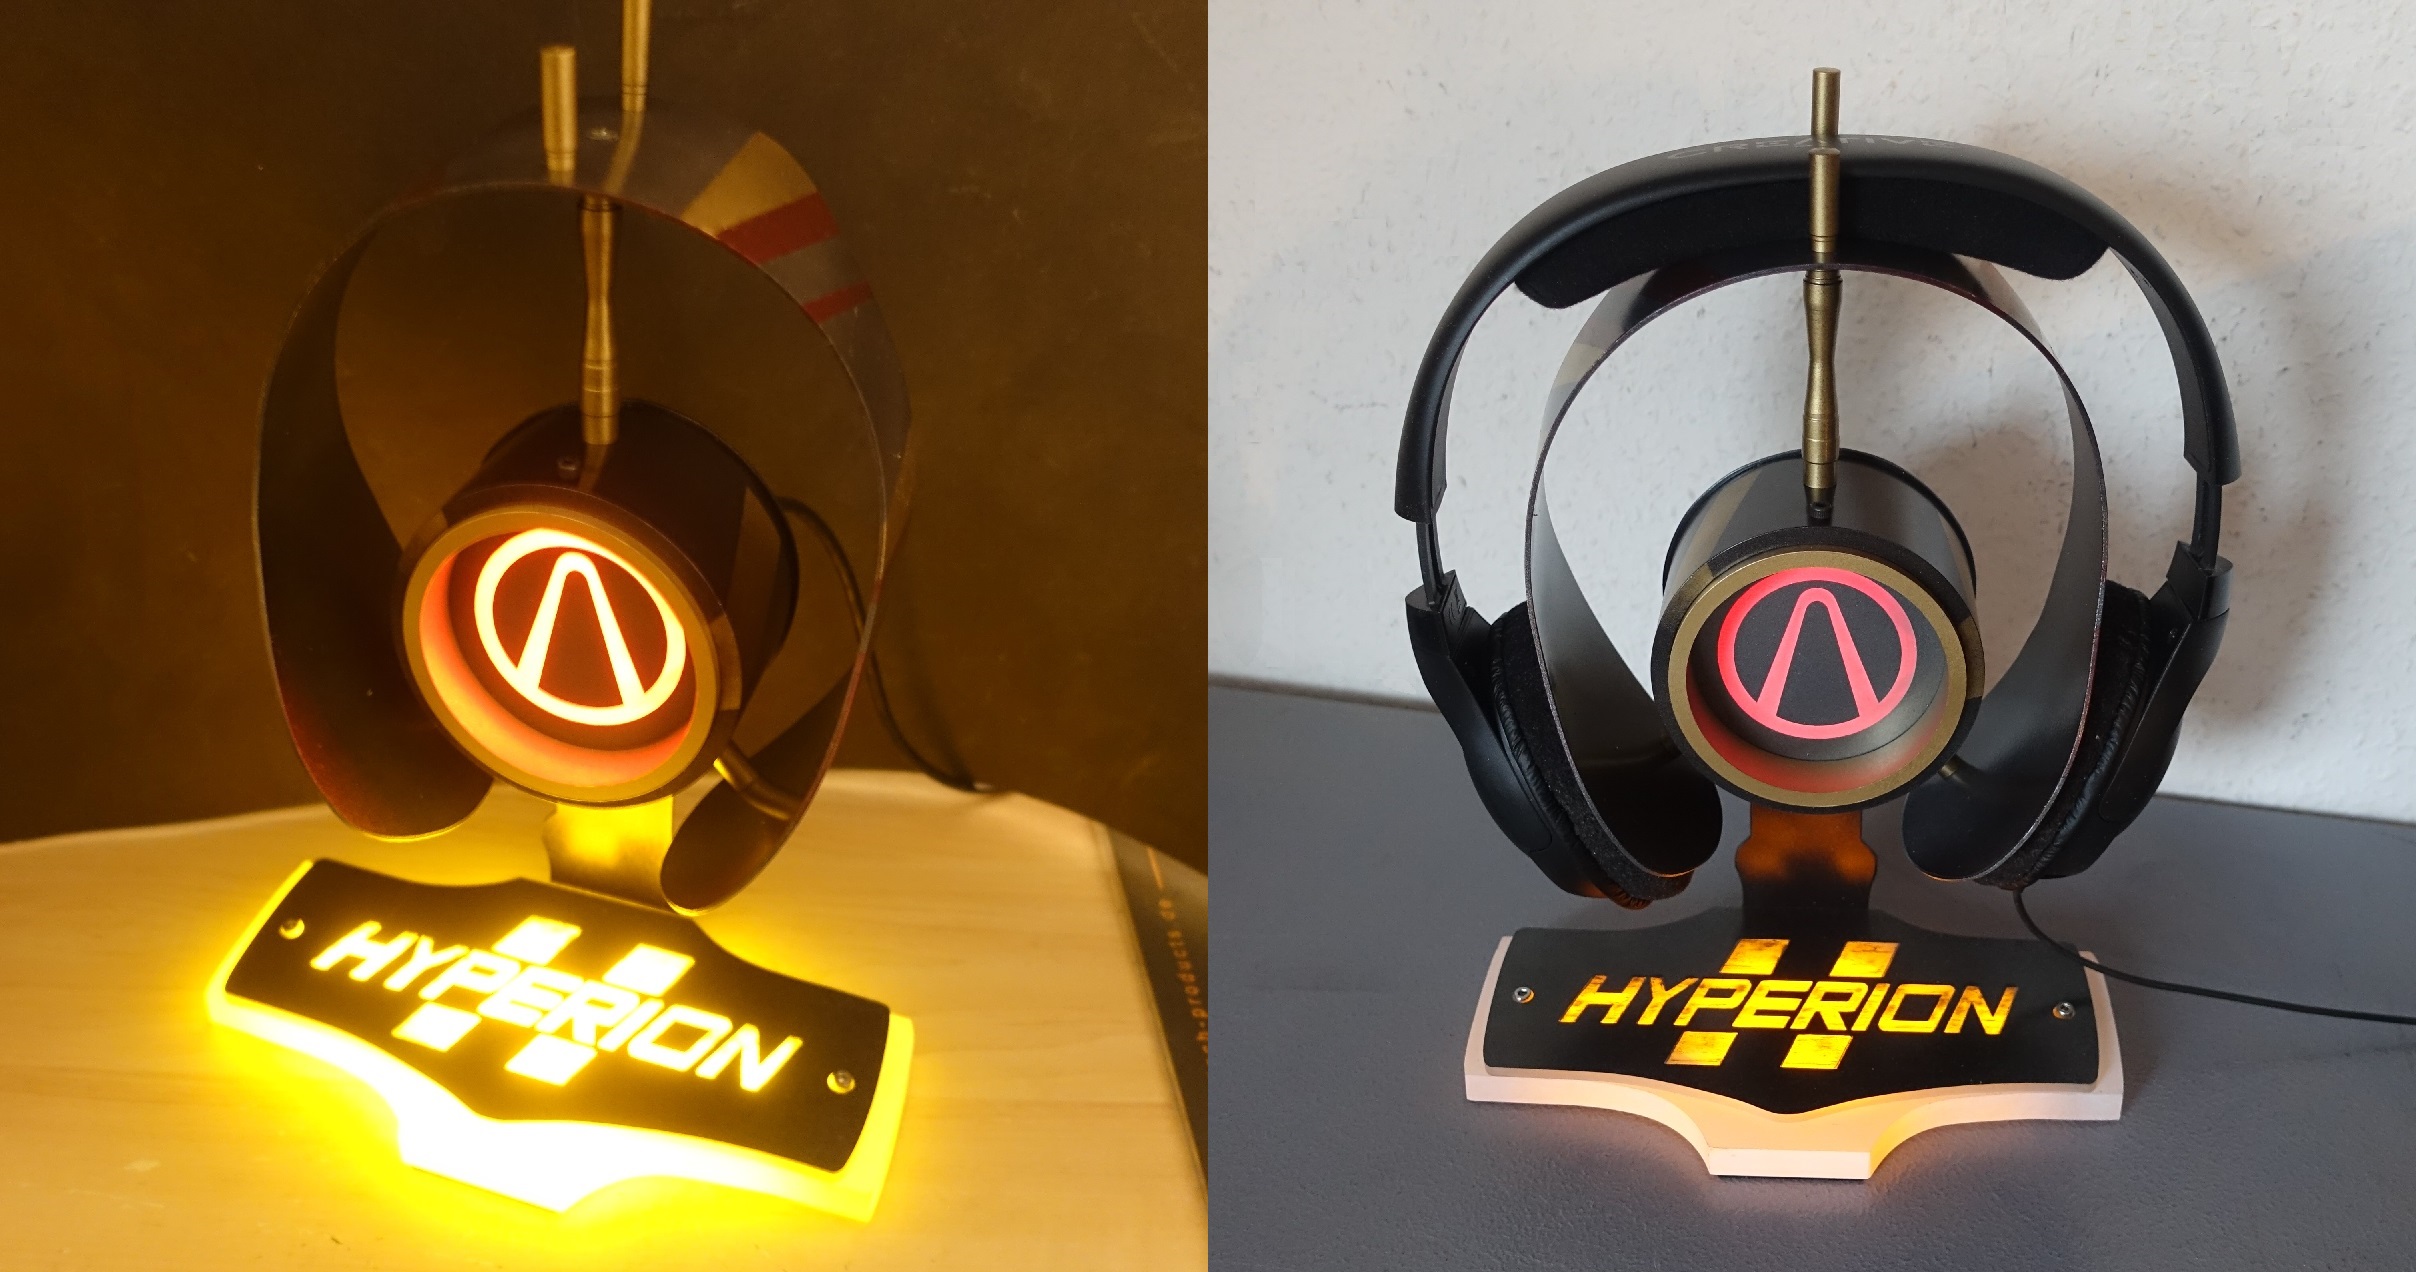 Custom made Hyperion headset relaxation